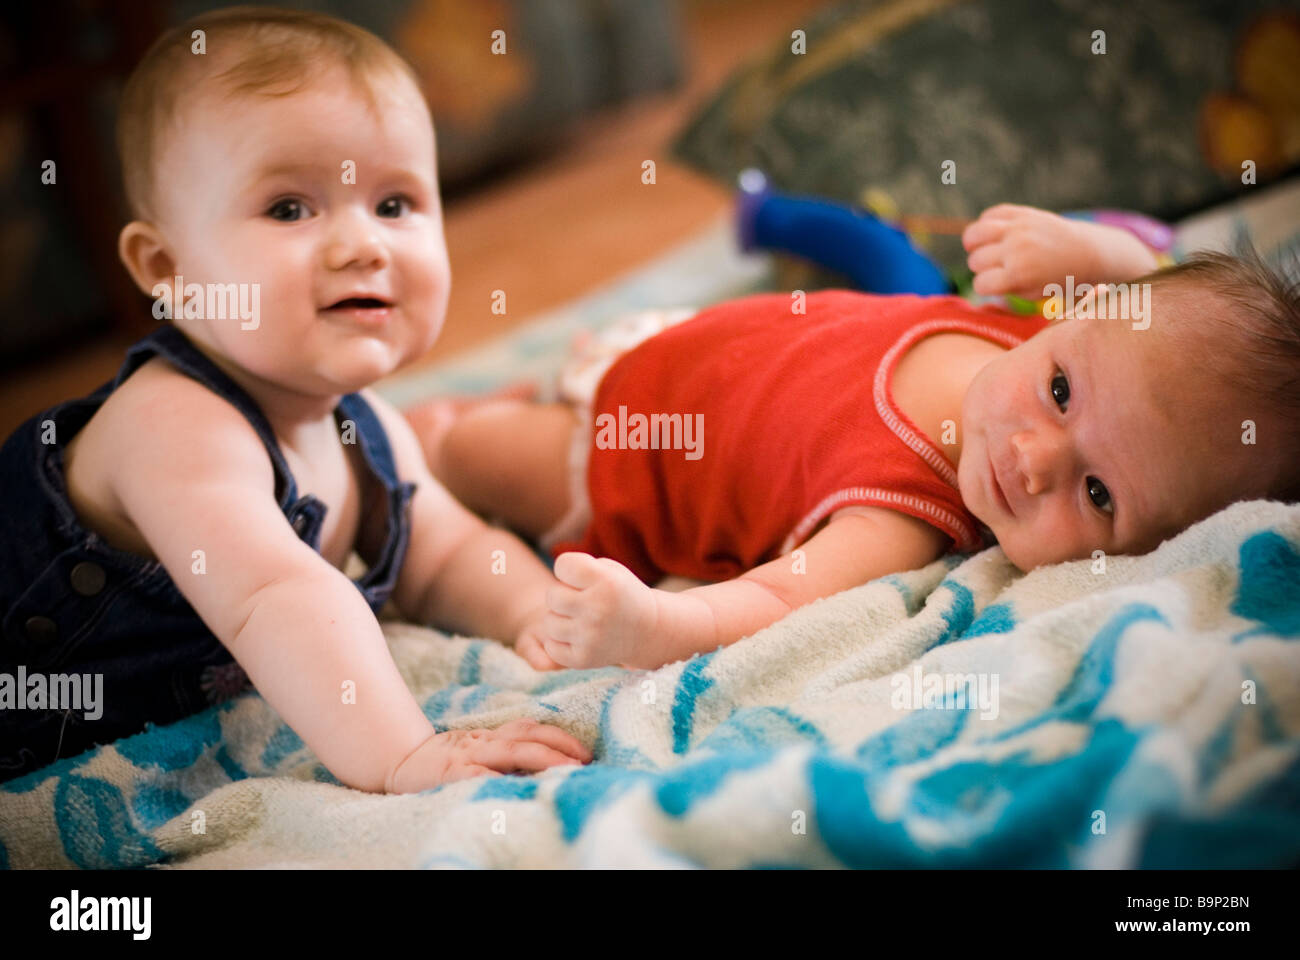 Two babies Stock Photo